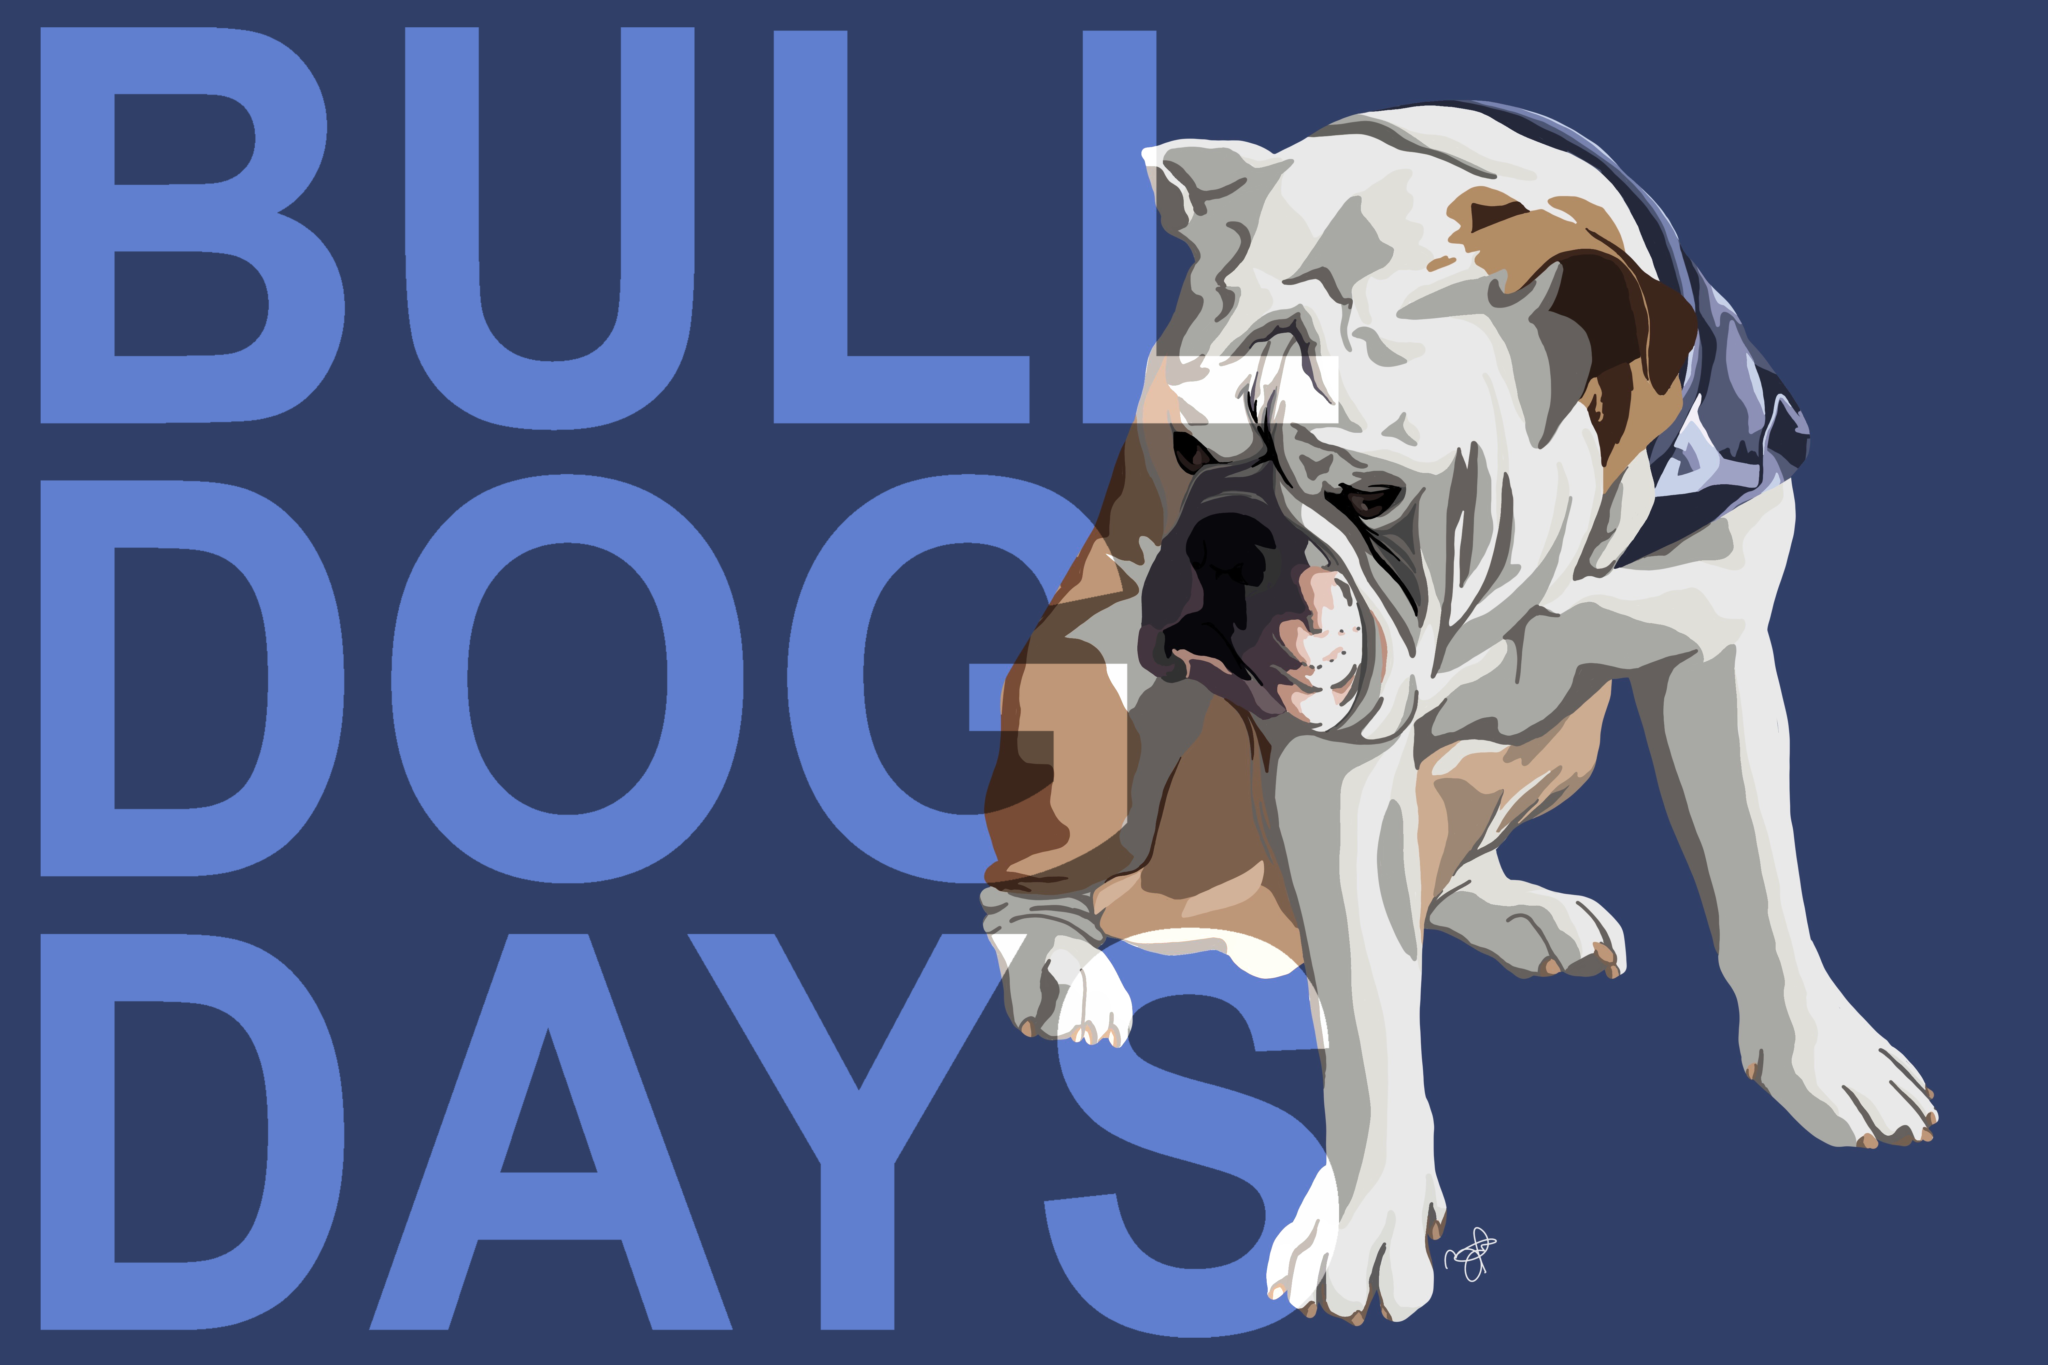 Bulldog Days back in person for first time since pandemic’s start